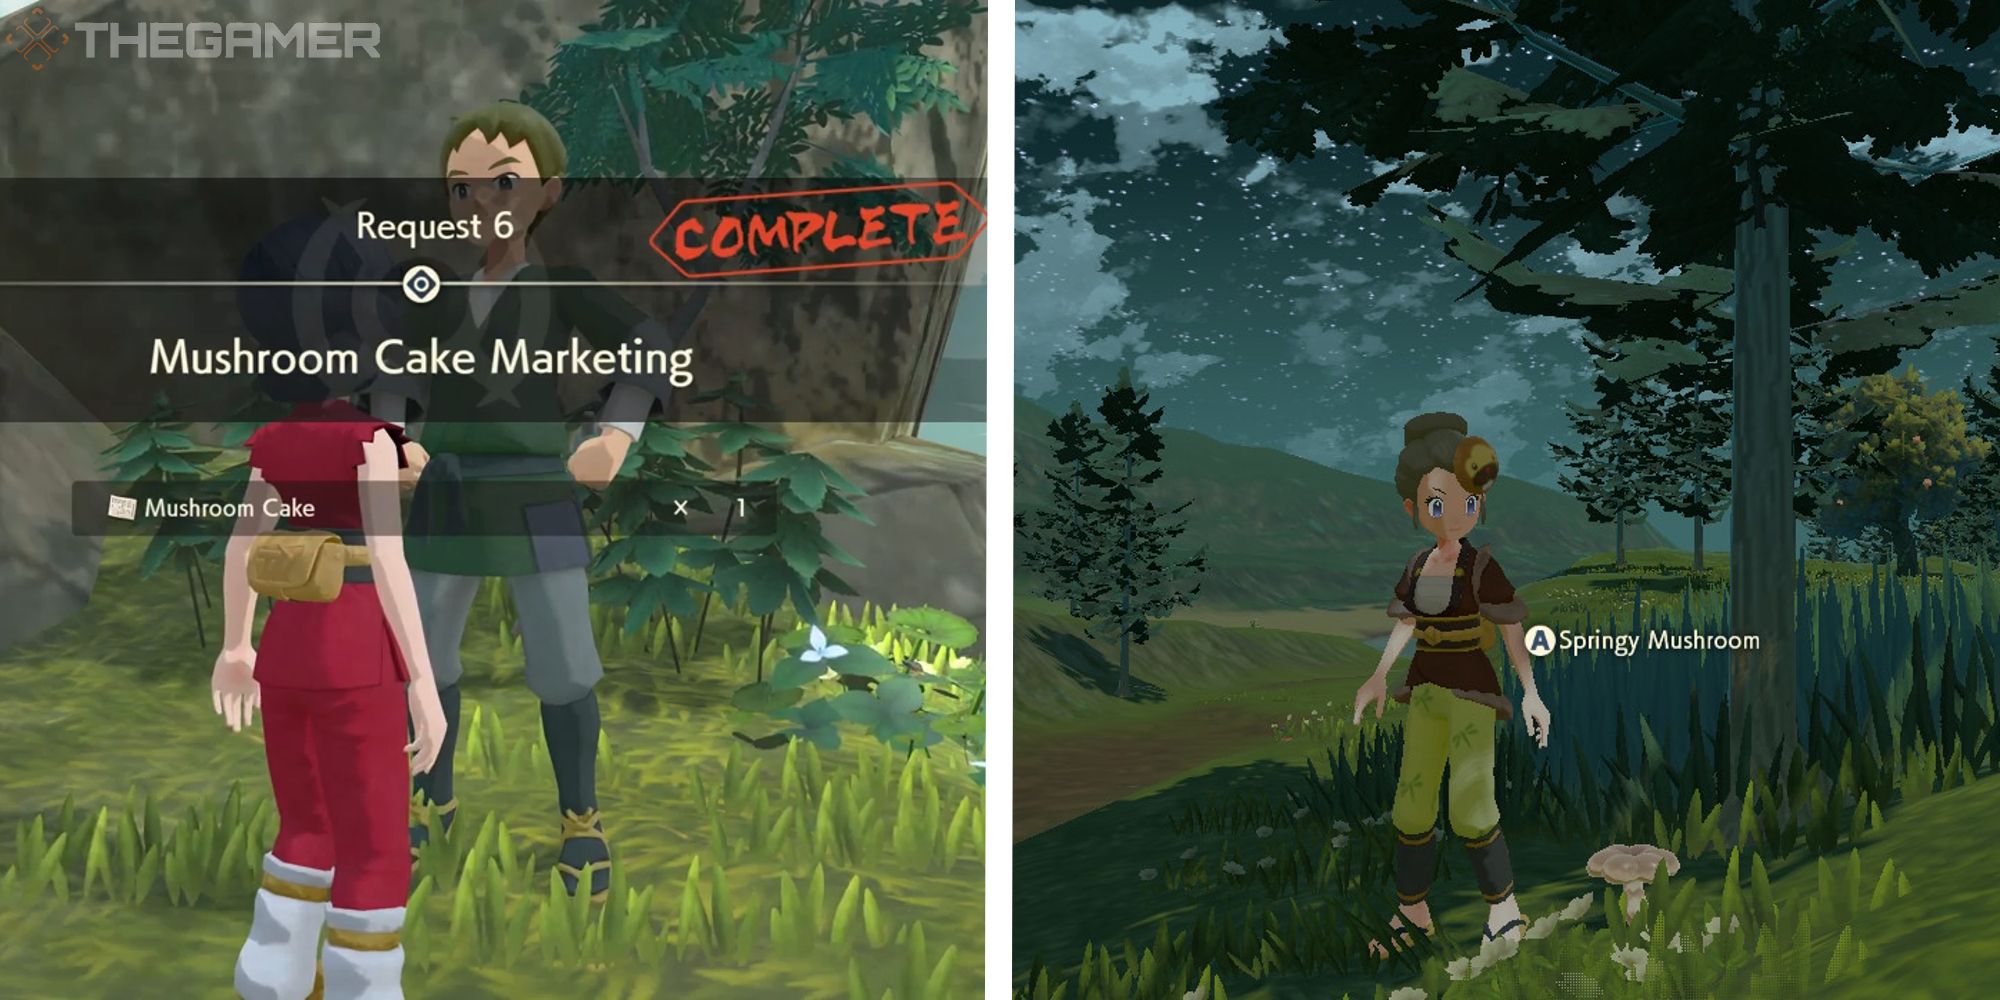 iamge of mushroom cake marketing completion, next to image of player standing near a springy mushroom